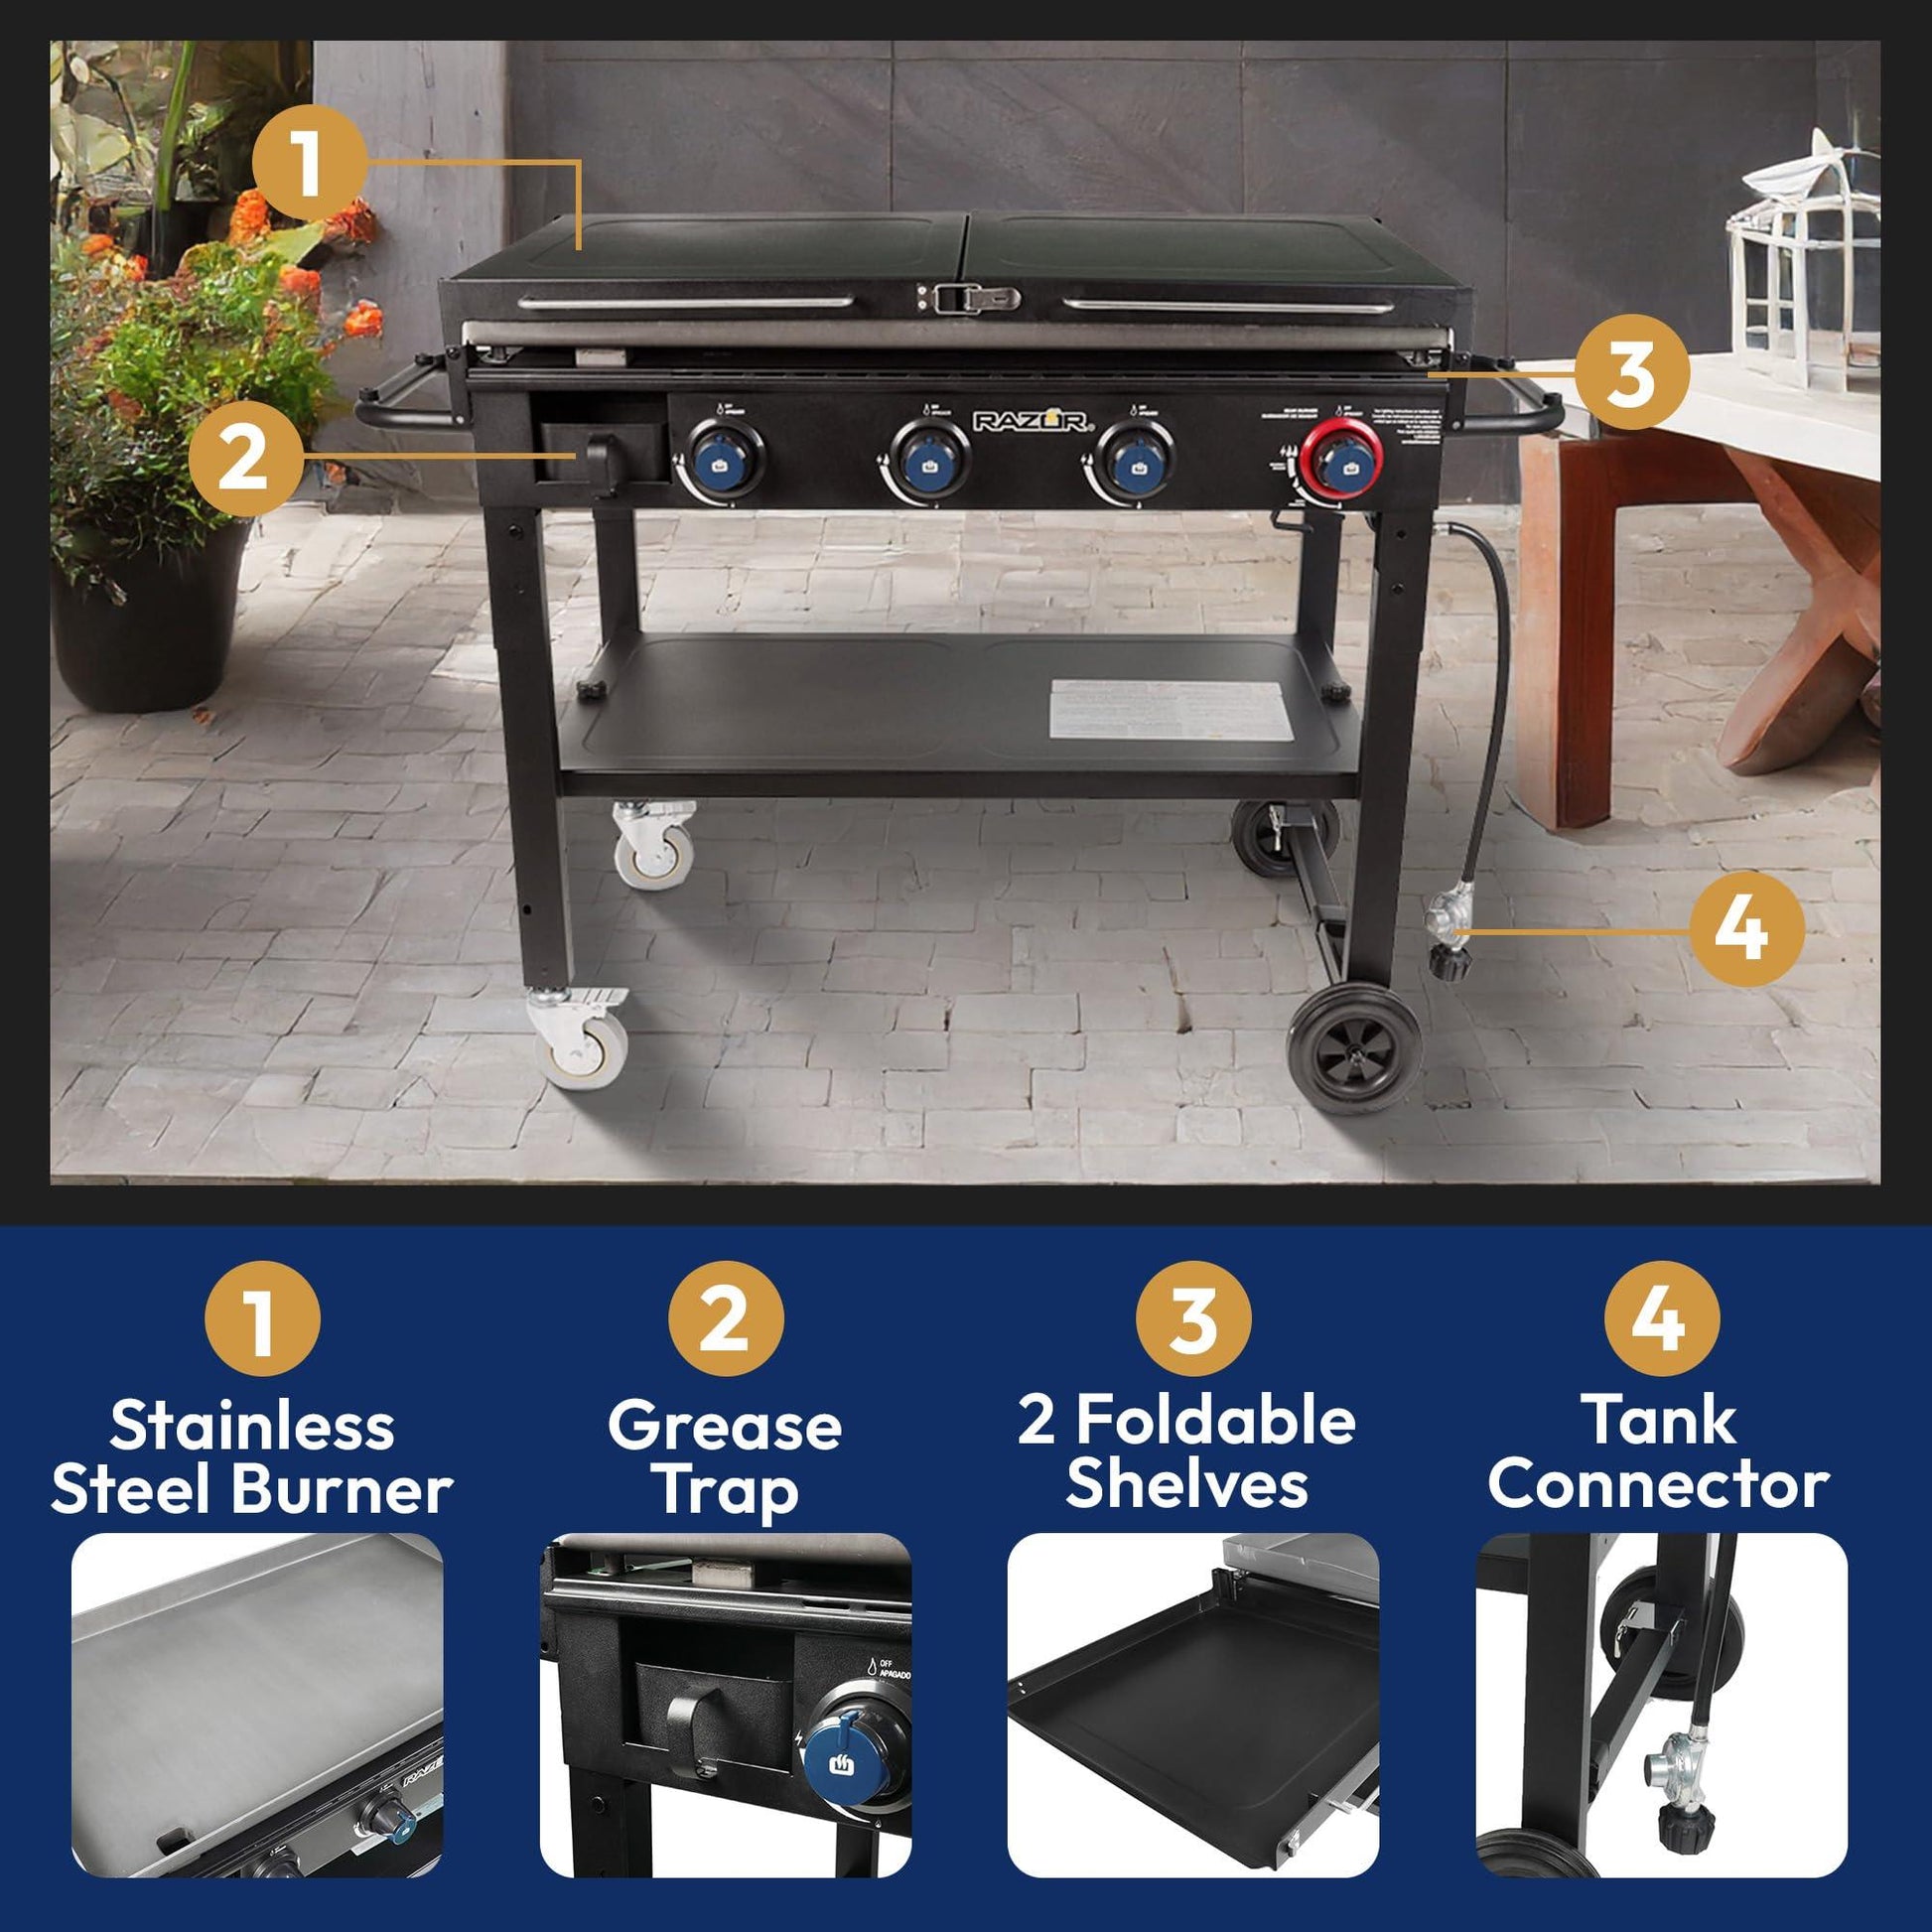 Razor Griddle 37 Inch Outdoor Steel 4 Burner Propane Gas Grill Griddle with Wheels and Top Cover Lid Folding Shelves for Home BBQ Cooking, Black - CookCave